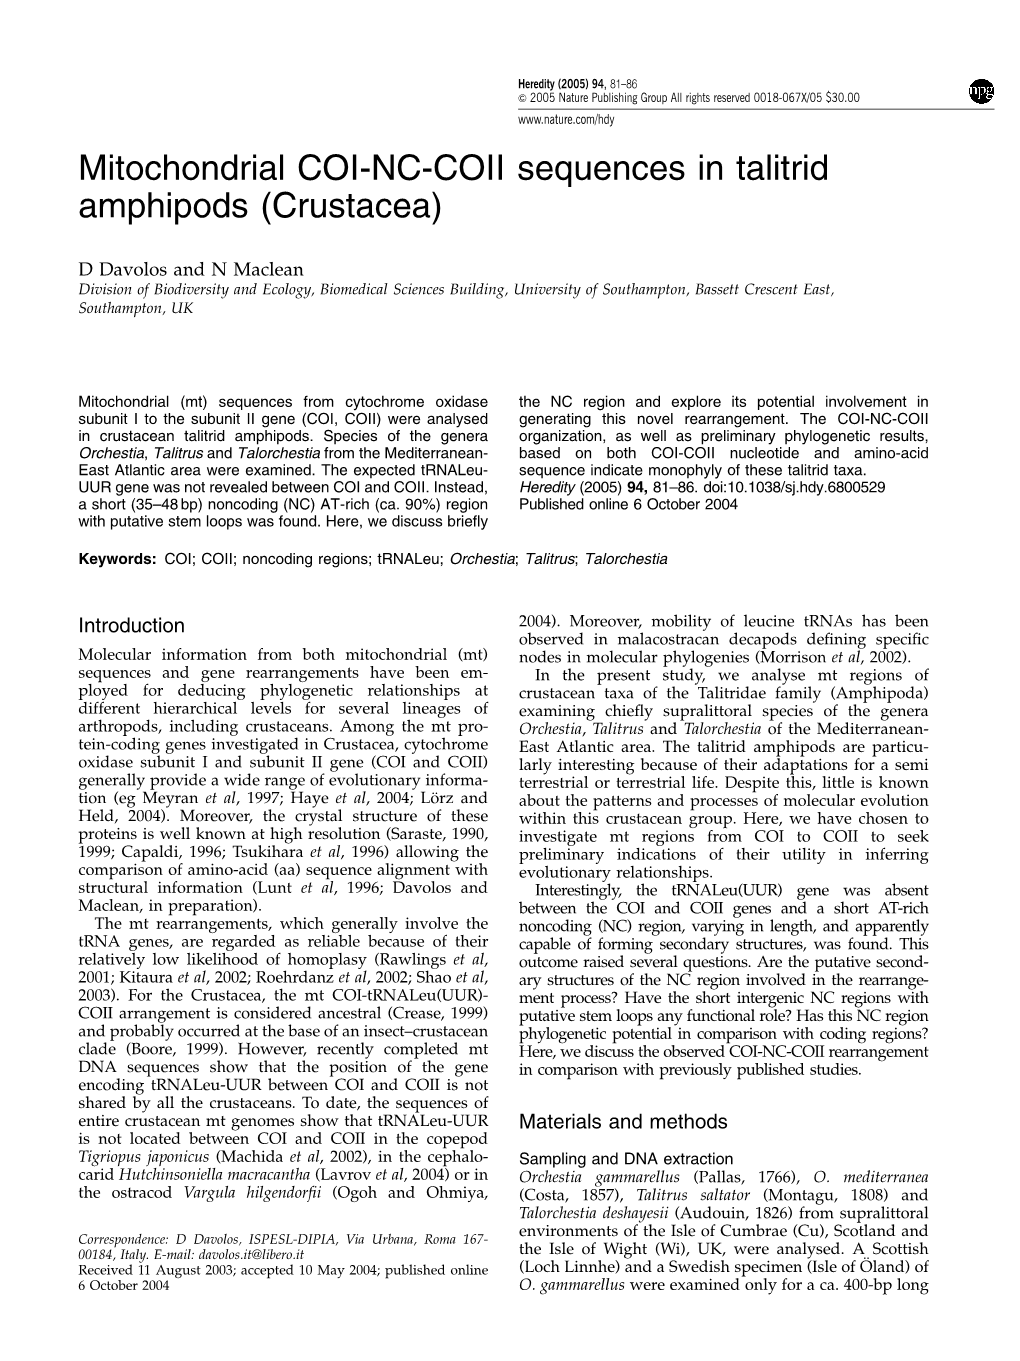 Mitochondrial COI-NC-COII Sequences in Talitrid Amphipods (Crustacea)